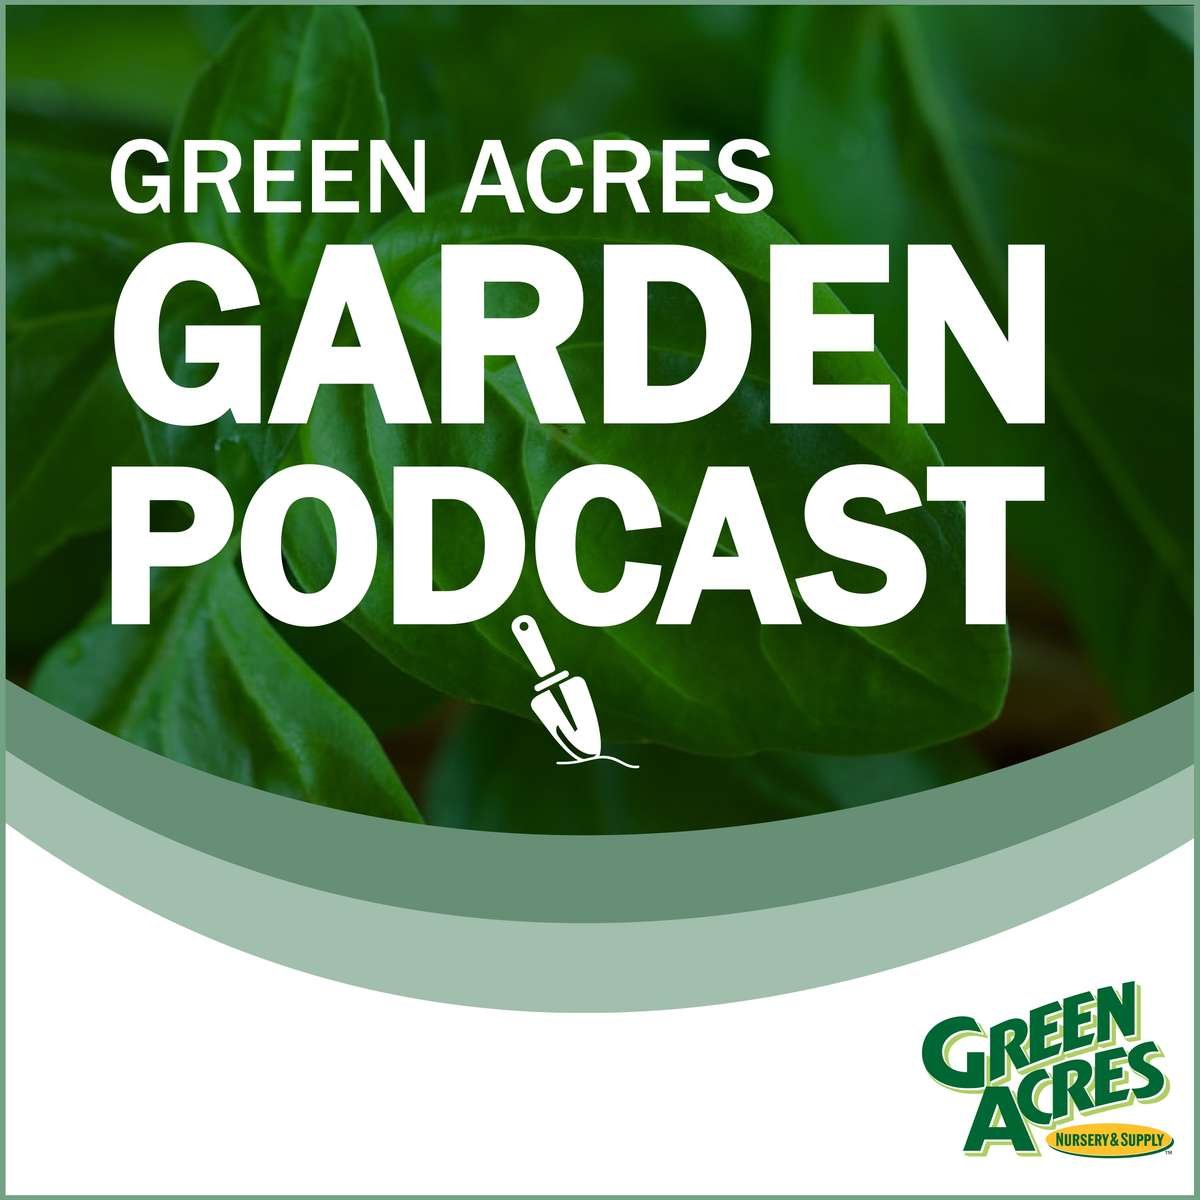 Green Acres Garden Podcast with Farmer Fred. Listen now!